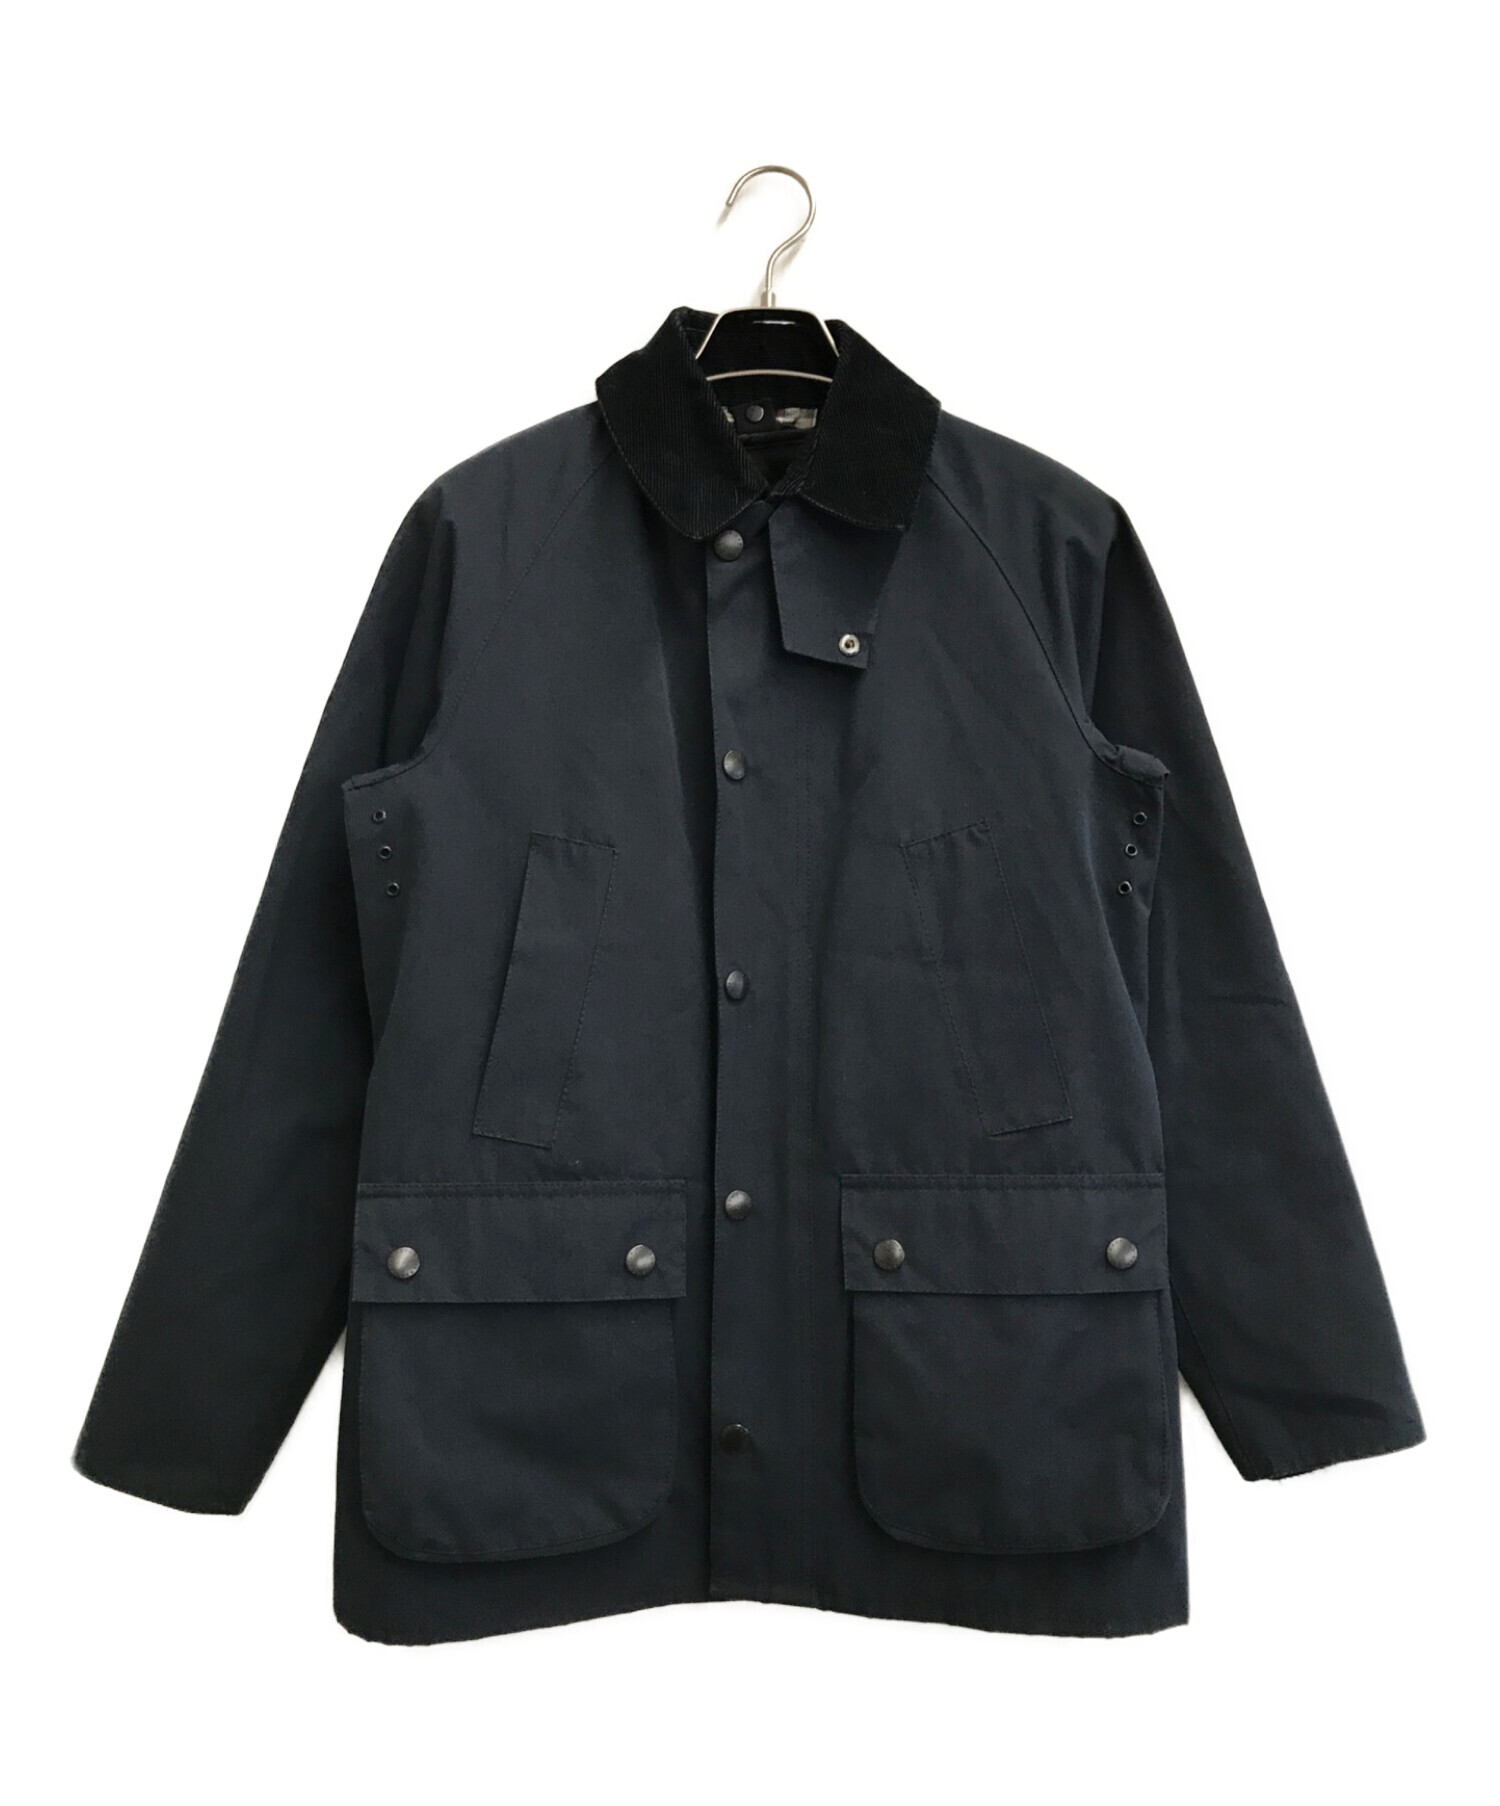 BARBOURBARBOUR バブアー CLASSIC BEDALE WAX サイズ36